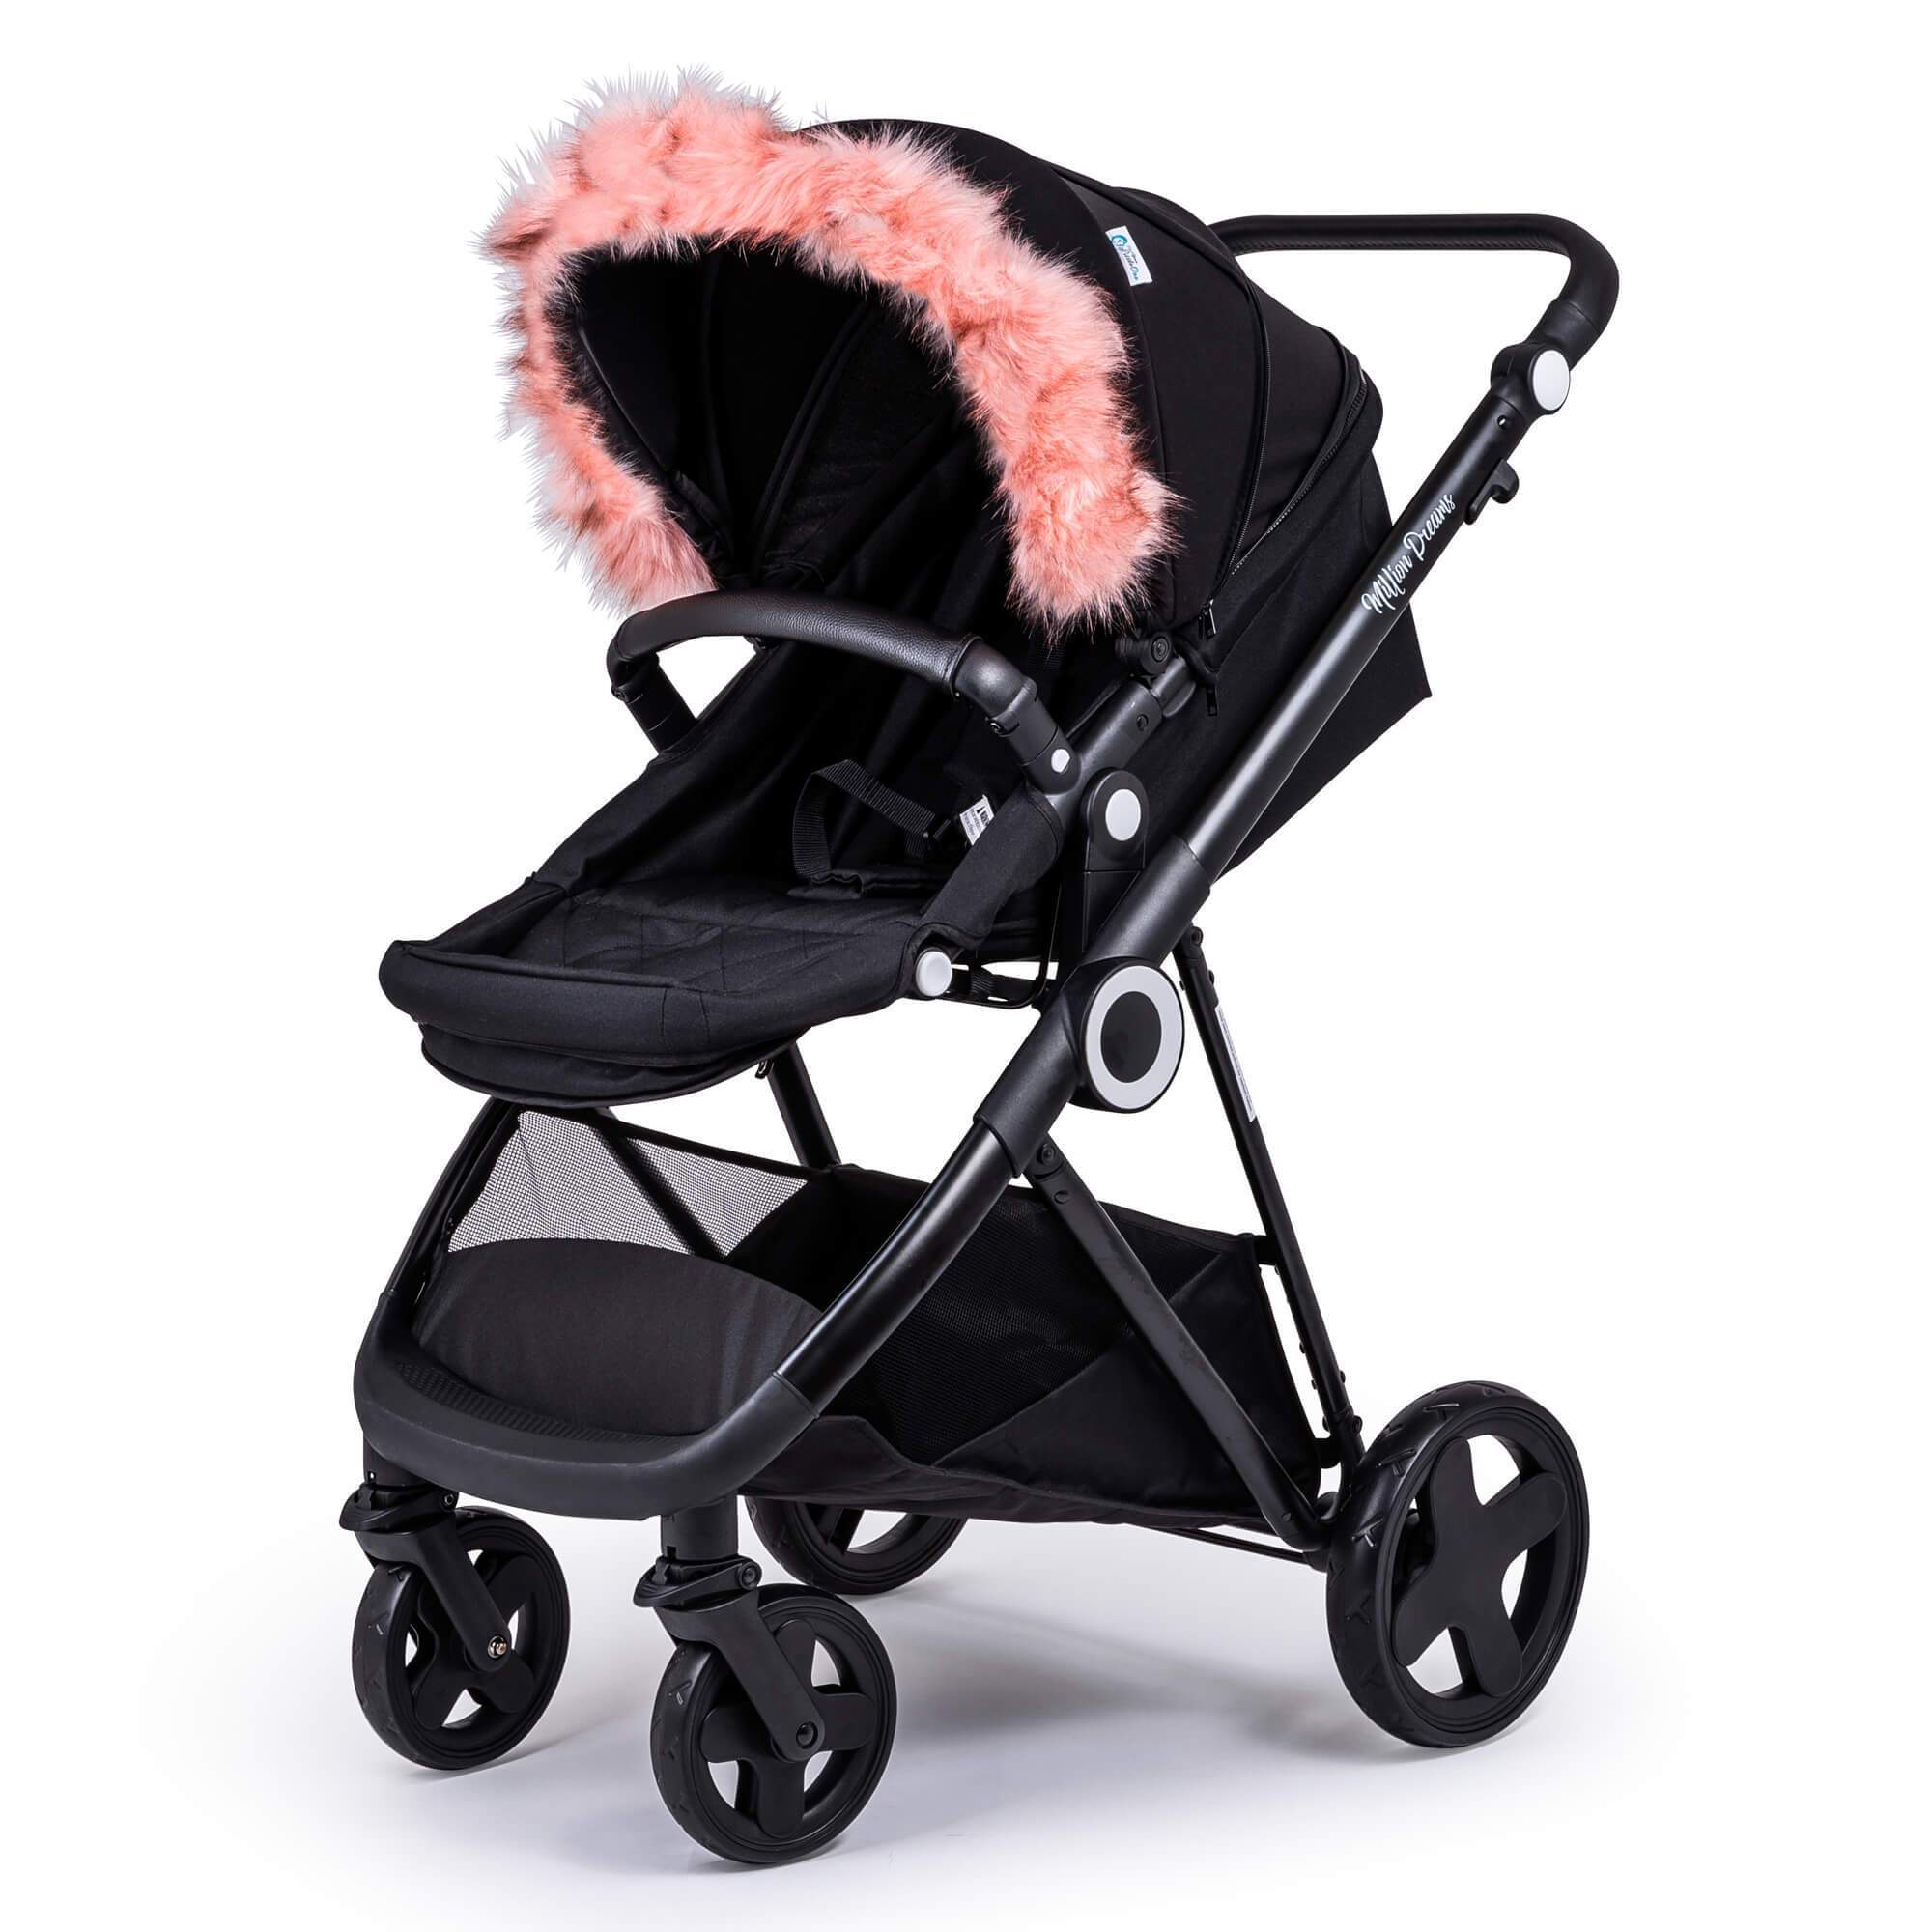 Pram Fur Hood Trim Attachment for Pushchair Compatible with Gesslein - For Your Little One